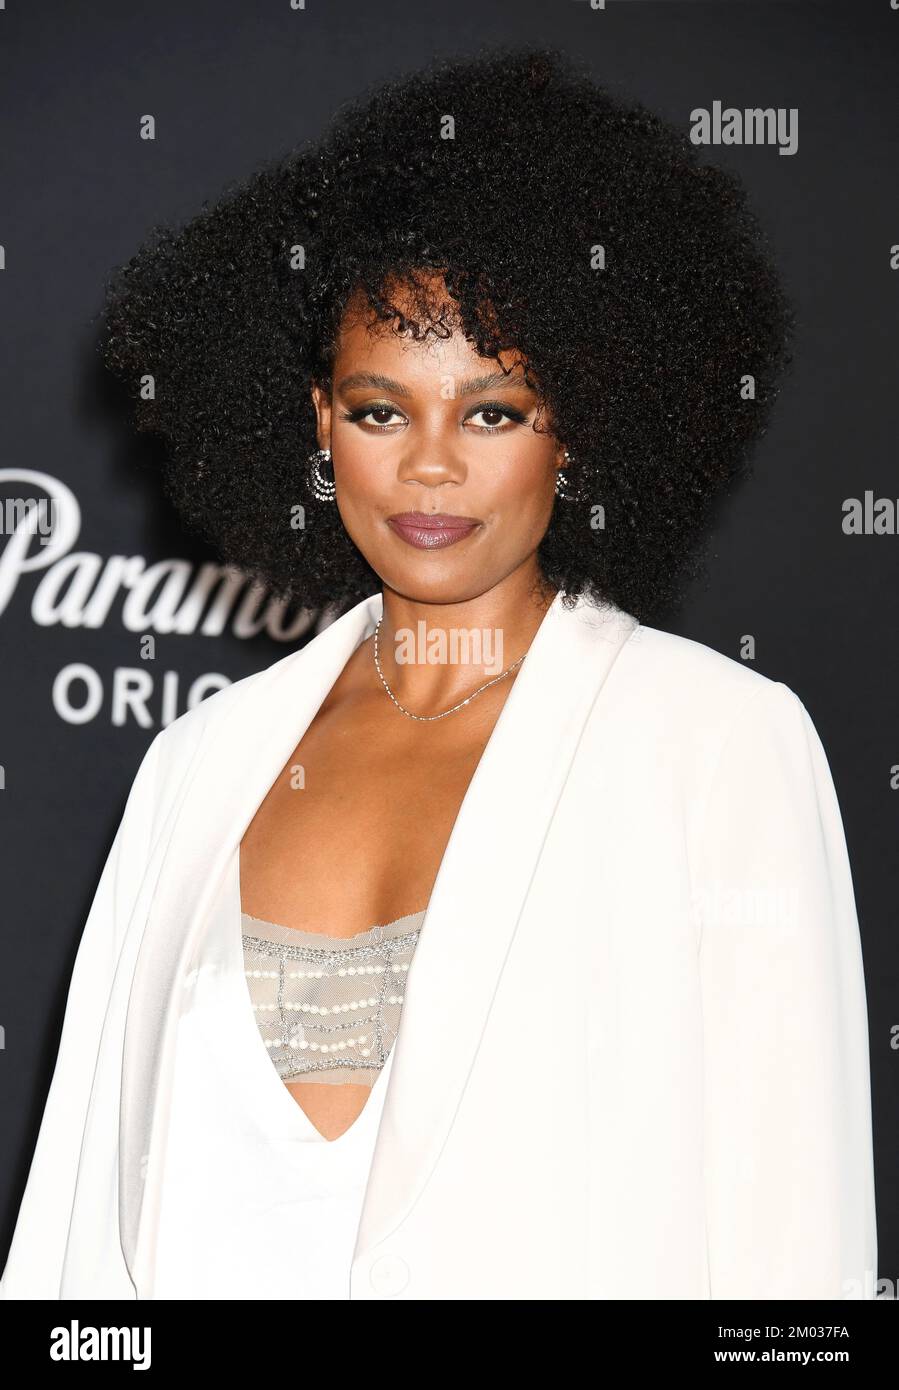 LOS ANGELES, CALIFORNIA - DECEMBER 02: Novi Brown attends the Los Angeles Premiere Of Paramount+'s '1923' at Hollywood American Legion on December 02, Stock Photo